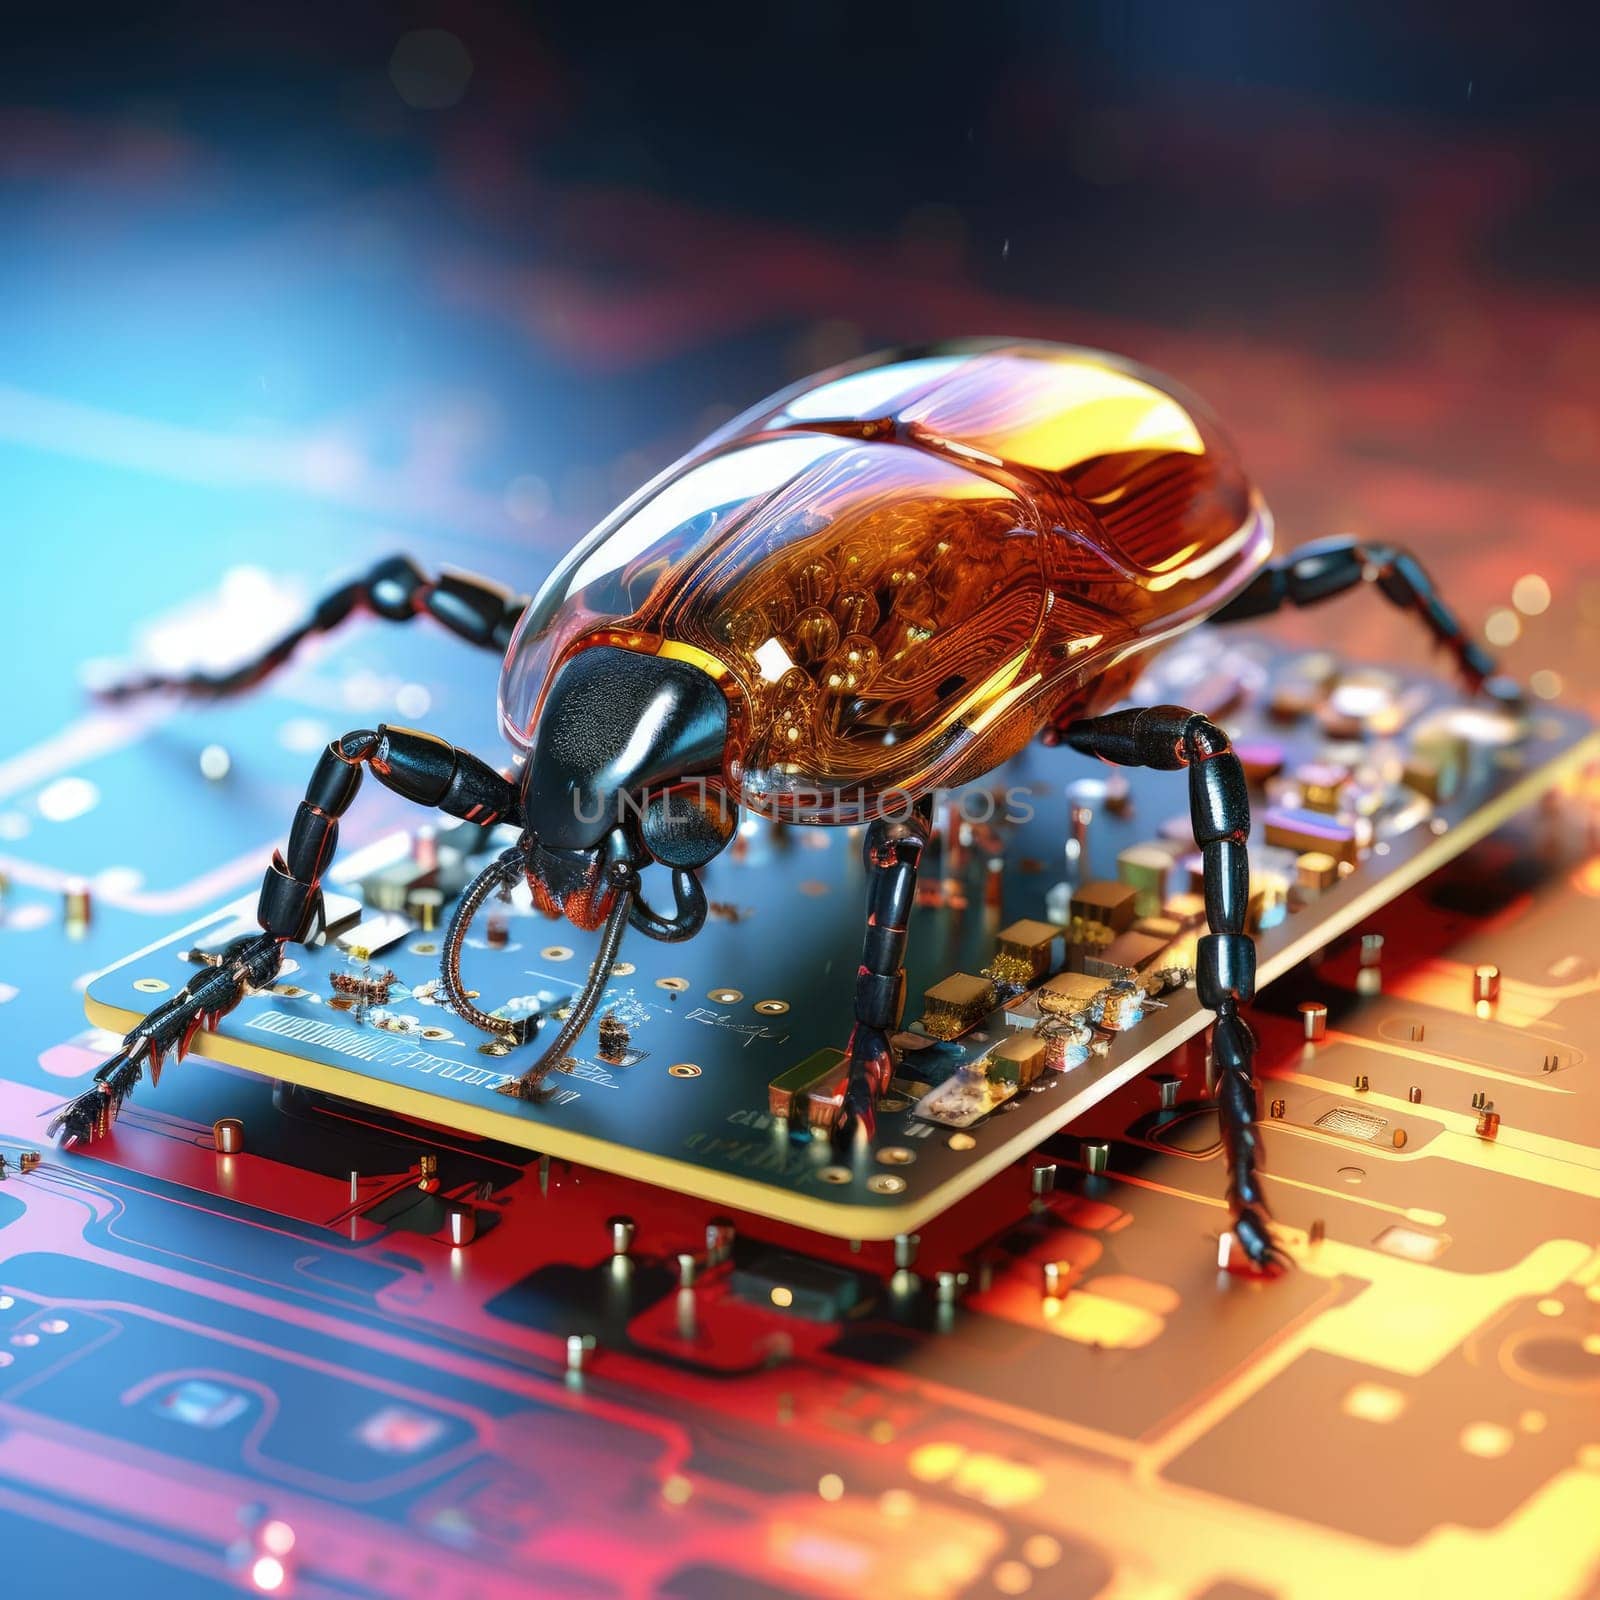 Electronic beetle on a chip. The concept of errors in software or errors in hardware